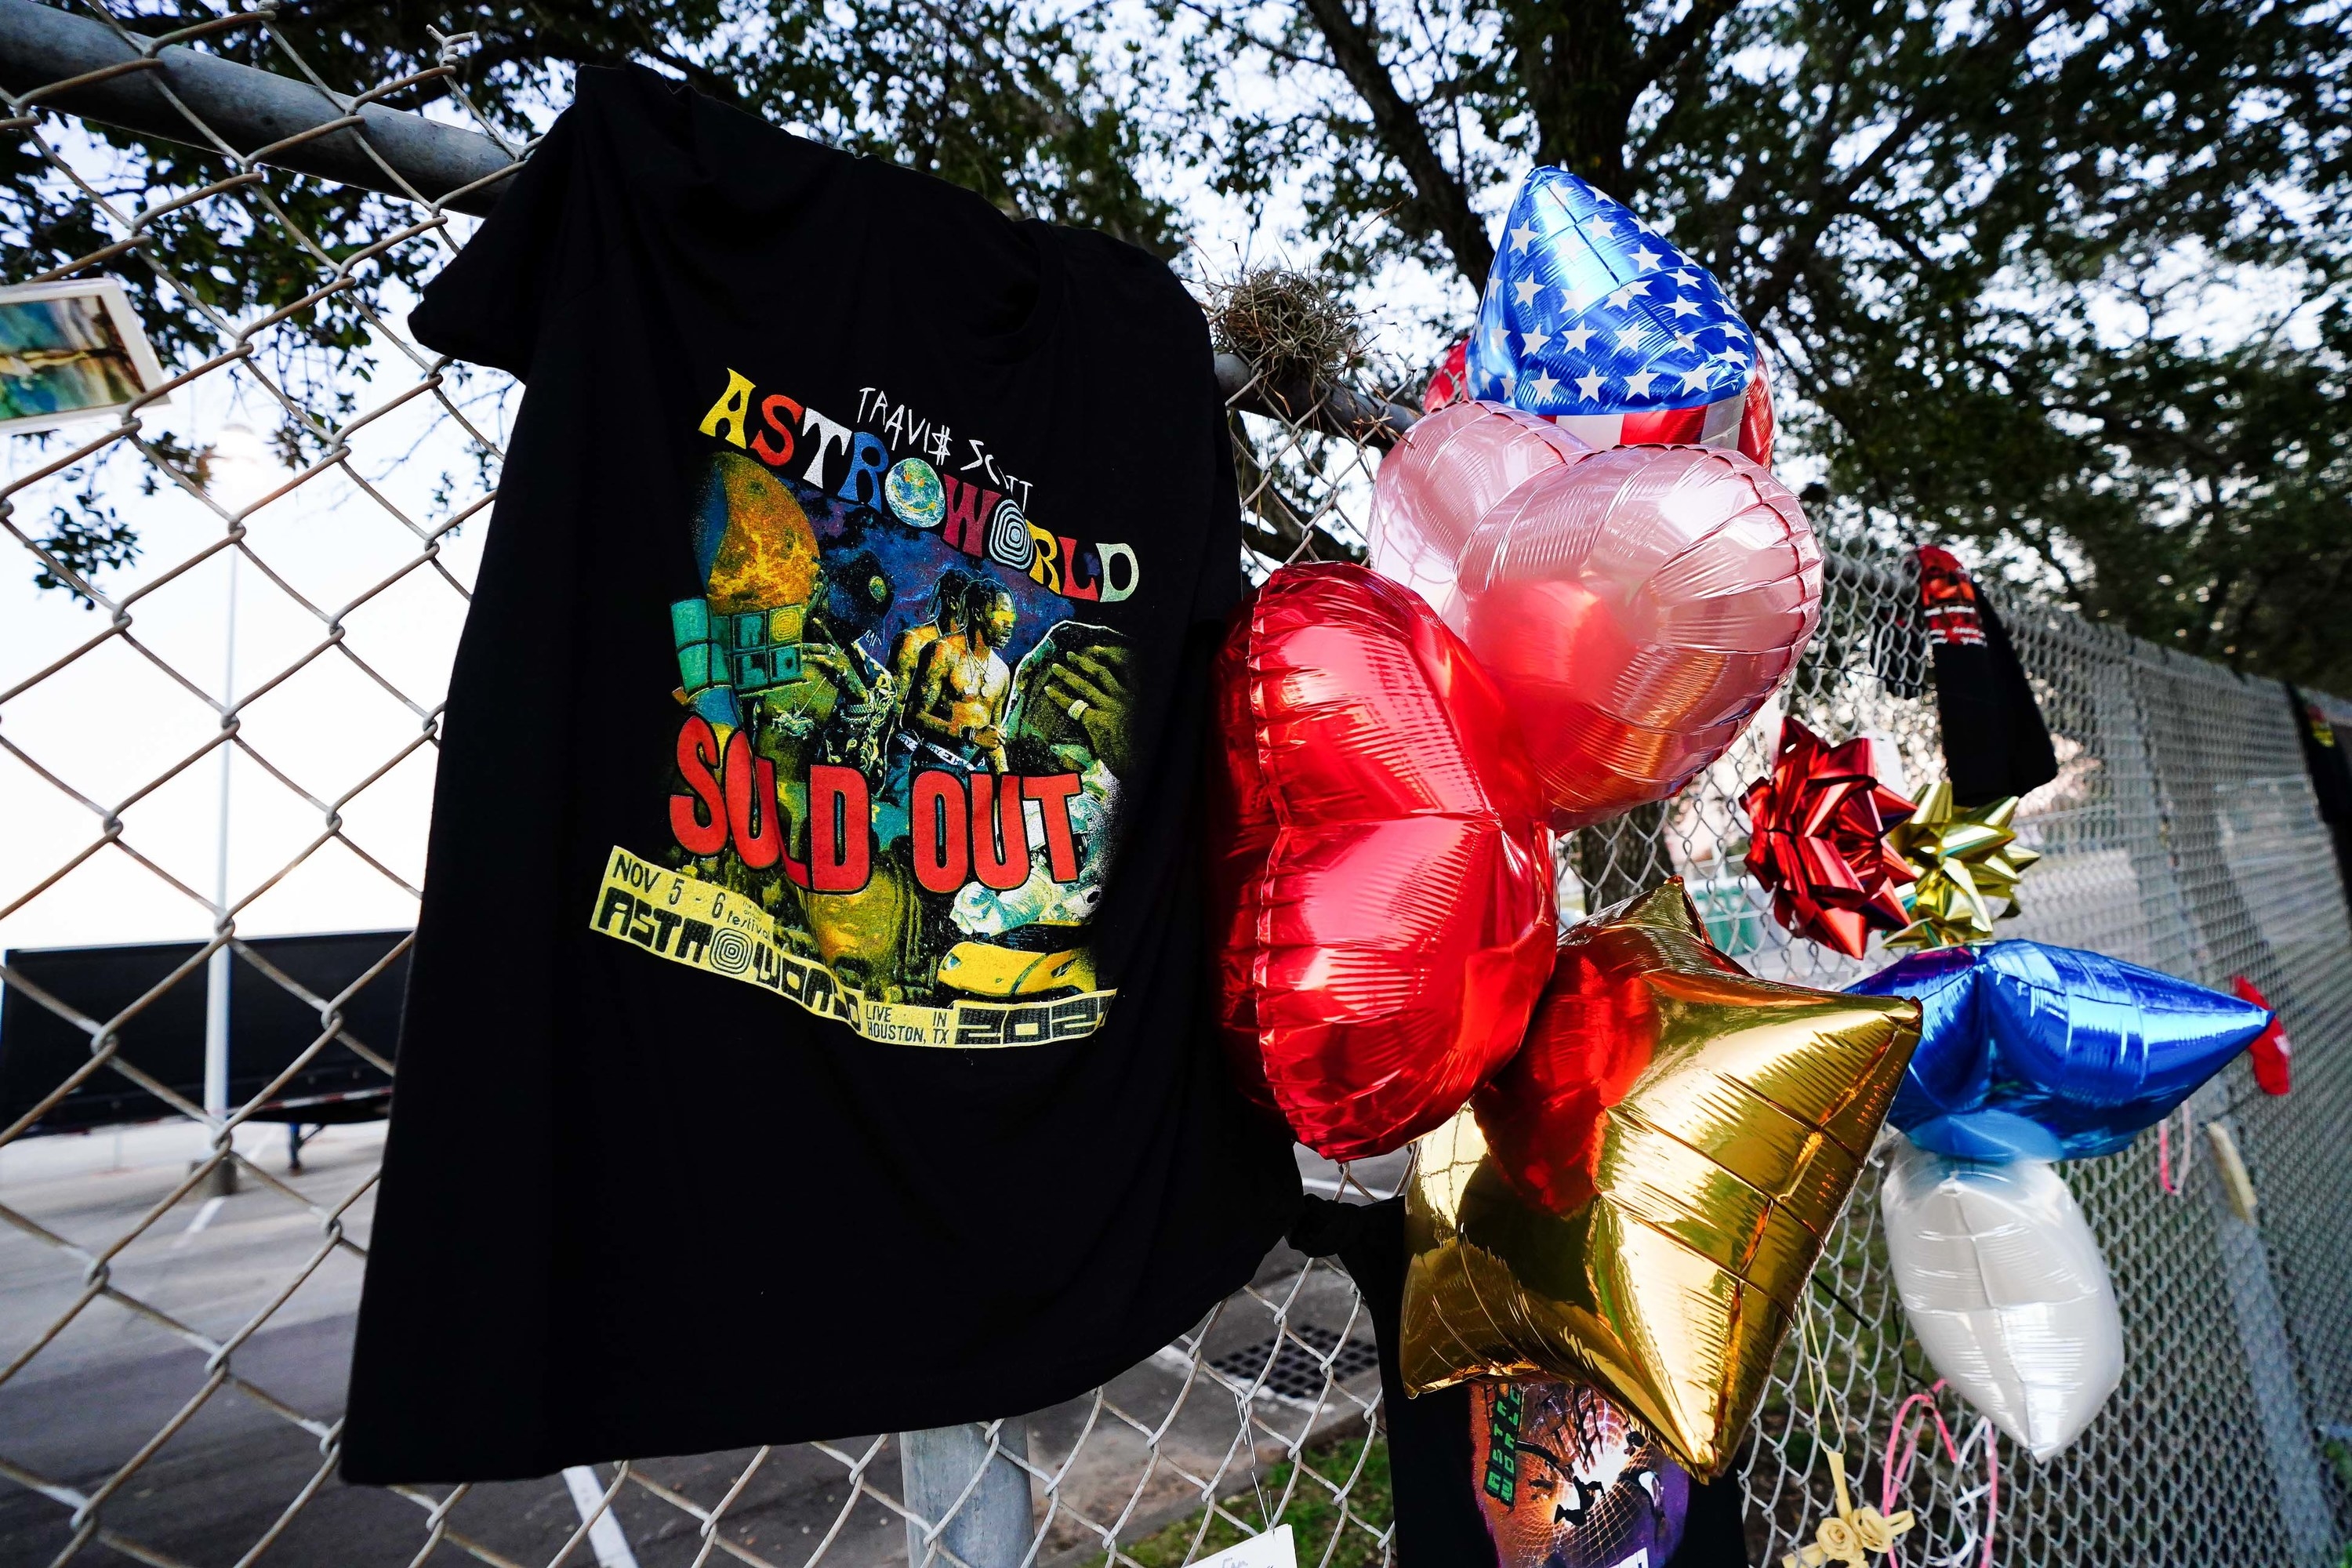 A T-shirt and balloons are placed at a memorial outside of the canceled Astroworld festival at NRG Park on November 7, 2021, in Houston